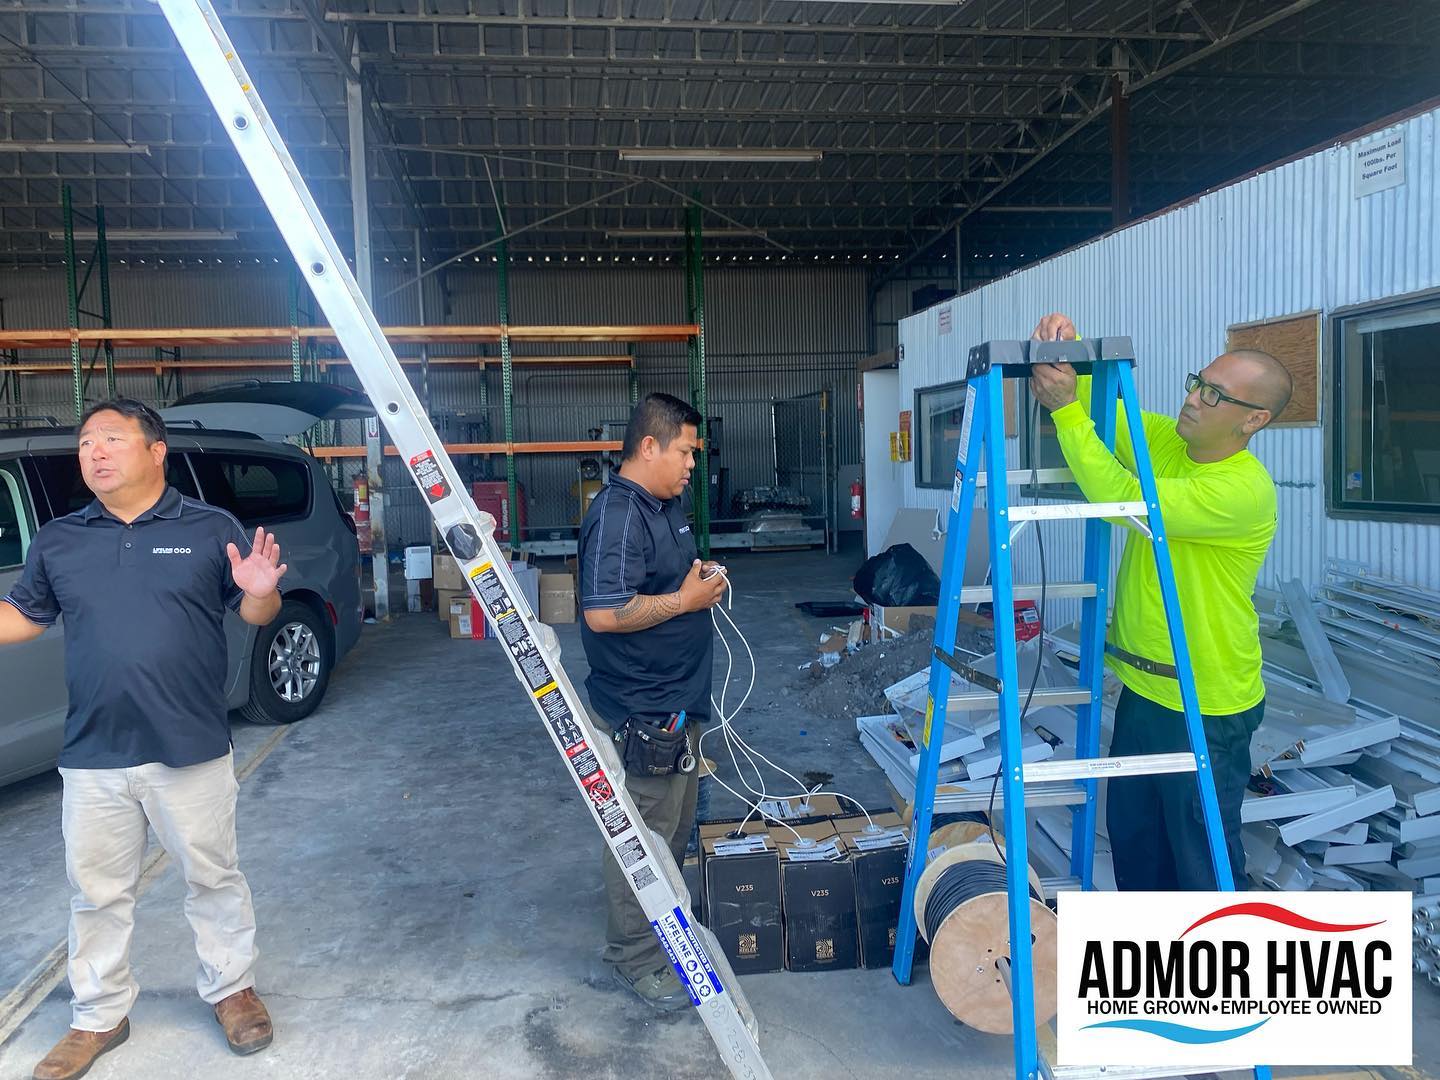 State of the art security system and 24 hour proactive video monitoring going in at our new Kona warehouse.  Renovation going strong.  This will be an amazing place for our Big Island customers to shop and learn!  Now hiring all positions.  Send resume to drew@admorhvac.com
#oahuhvac #mauihvac #kauaihvac #hawaiihvac #konahvac #hawaiihvaccontractor #hawaiihvacsuperstore #hvac #hvaclife #hvactechnician #hvacowner #hvacpro #hvactechnician #hvactech #hvacservice #hvacrepair #hvacinstall #hvactools #hvactech #hvaccontractor #hvacmaintenance #hvacsupplies #hvacwholesaler #hvacinstallation #airconditioning #airconditioninginstallation #airconditioningrepair #airconditioningcontractor #konajobs #hawaiijobs #helpwanted #hawaiilife